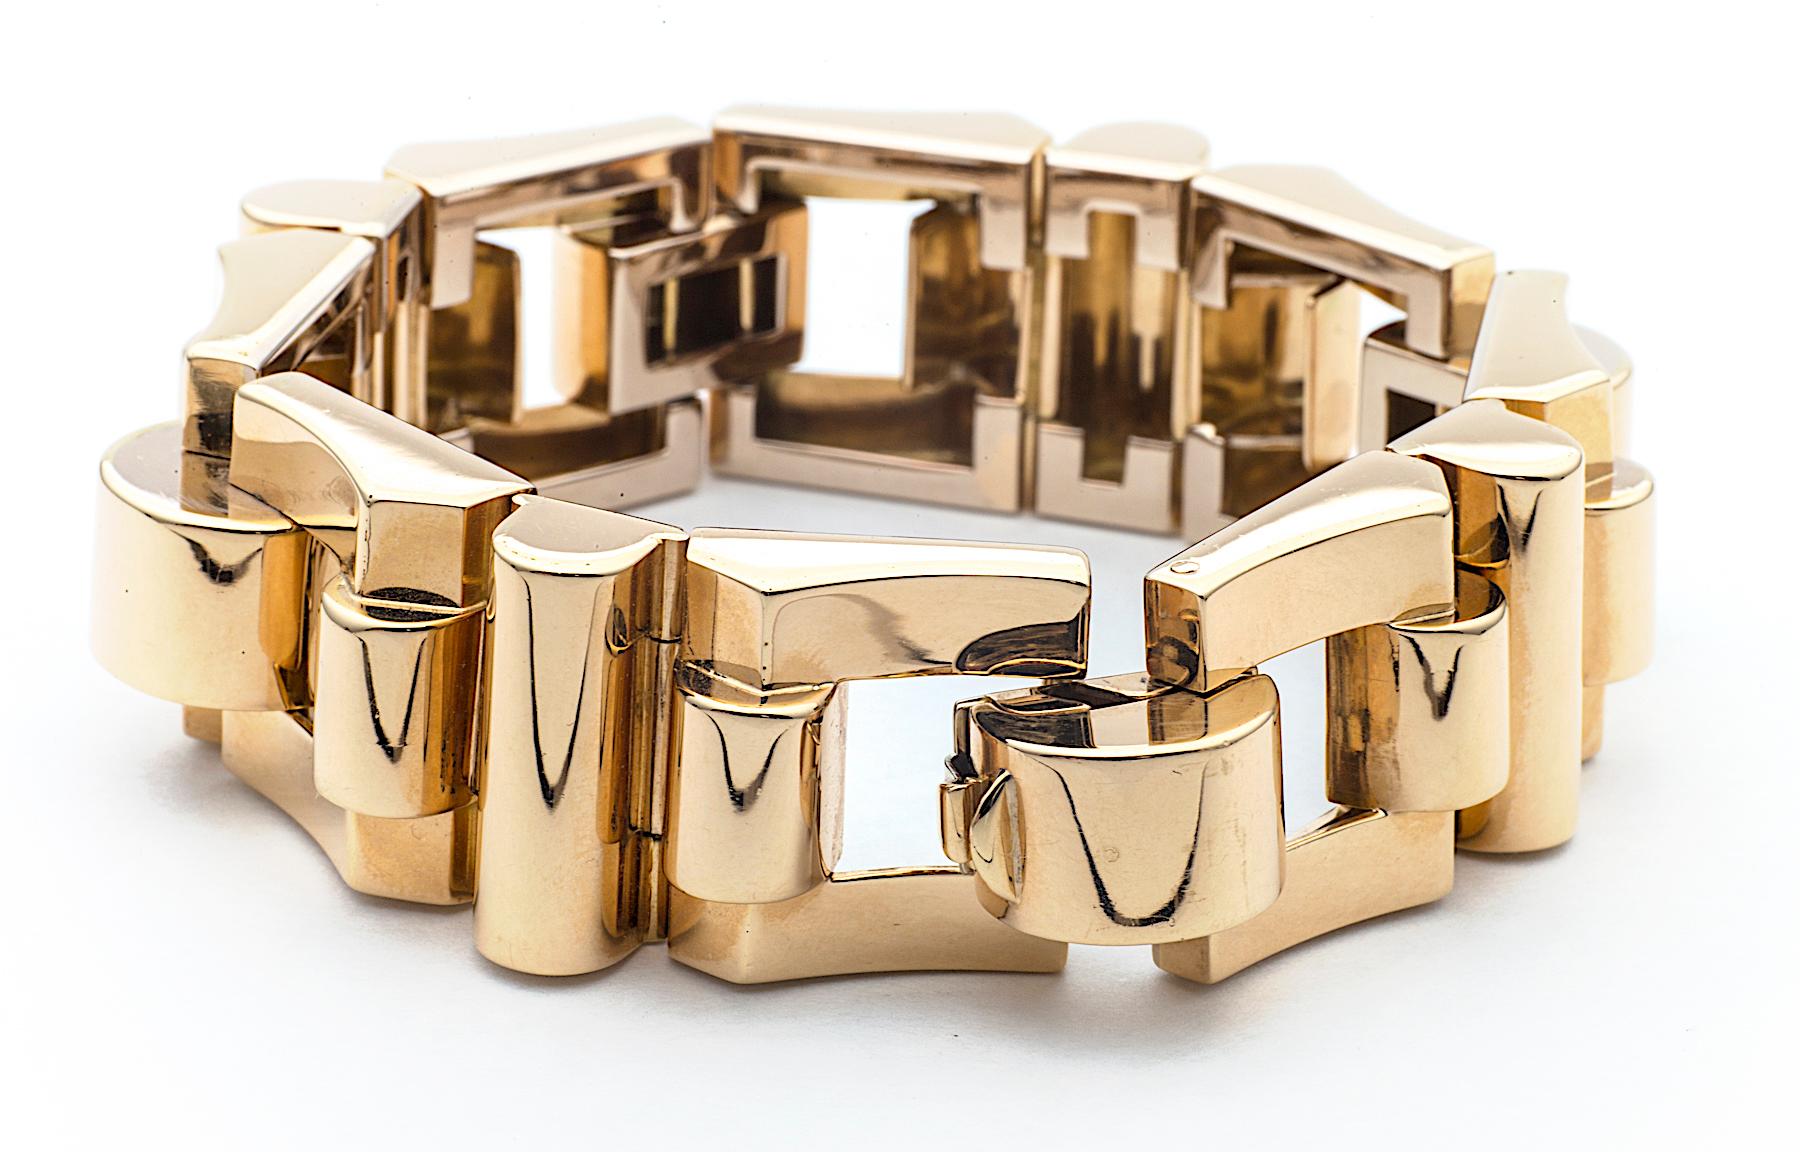 
This machine age retro link bracelet, circa 1945, reflects how jewelry makers after World War II were inspired to create heavy geometric designs that paid homage to the monumental equipment used to win the war.  With a one-of-a-kind design